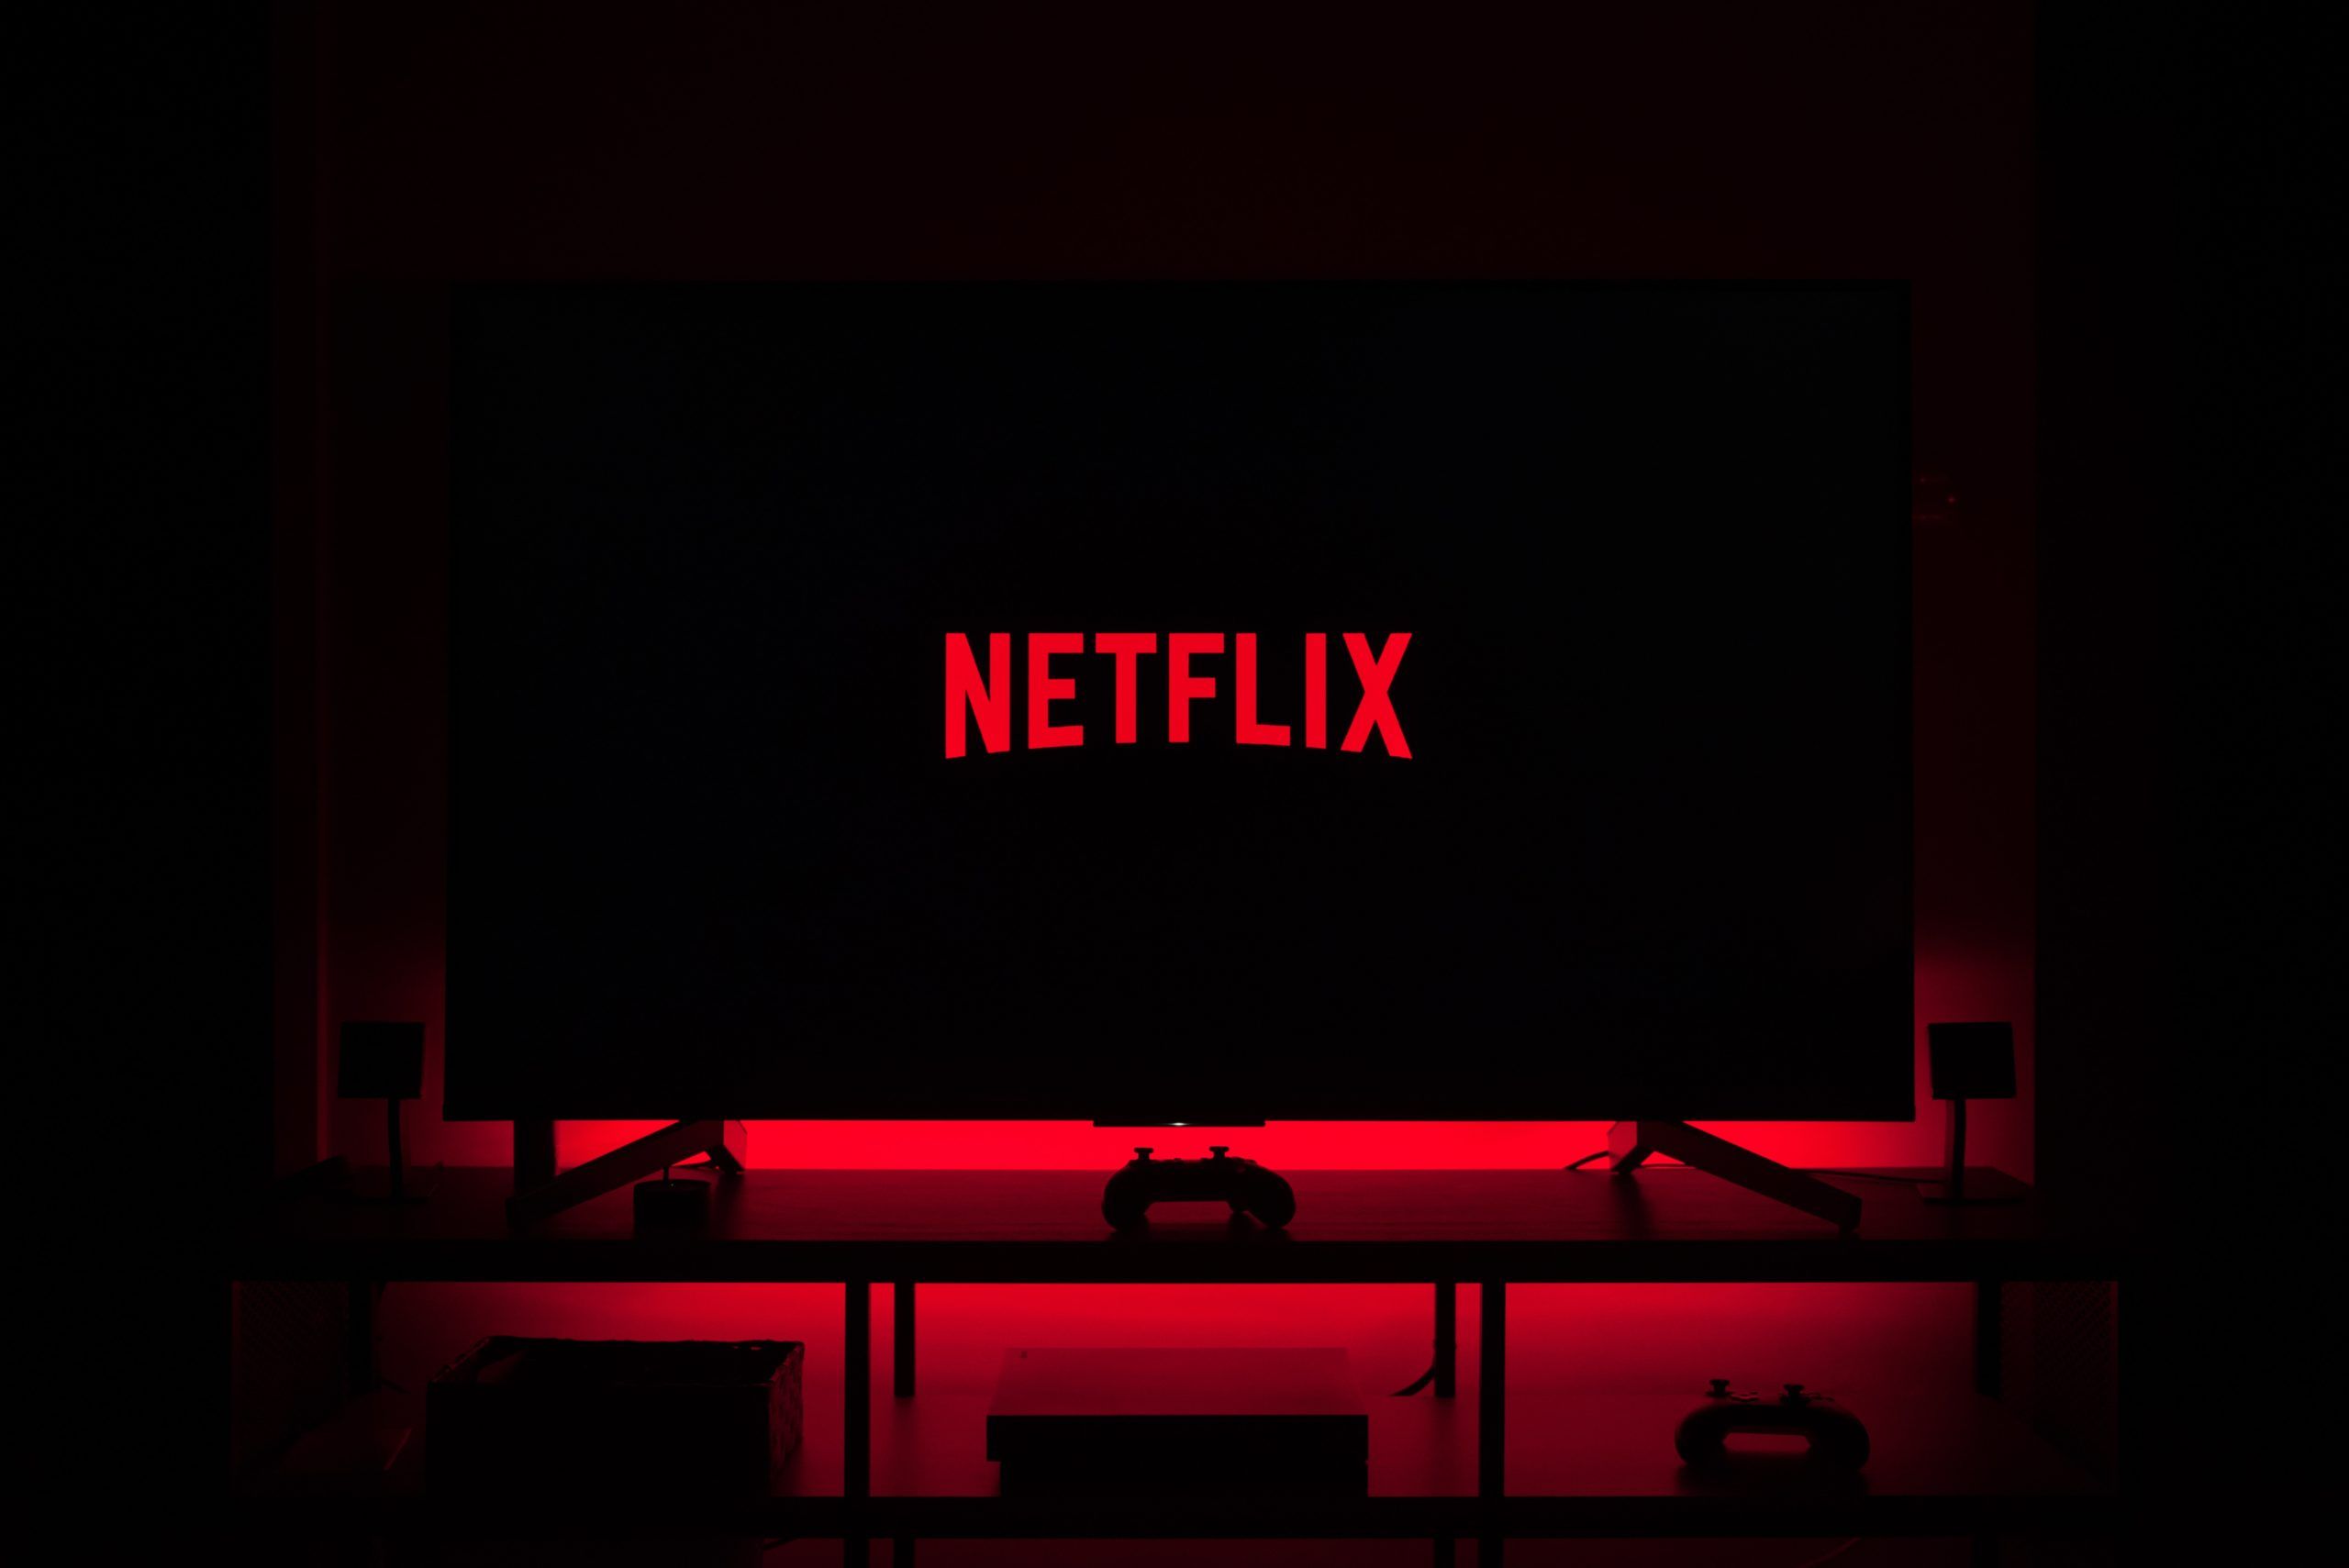 Netflix tests an audio-only mode according to some leaks